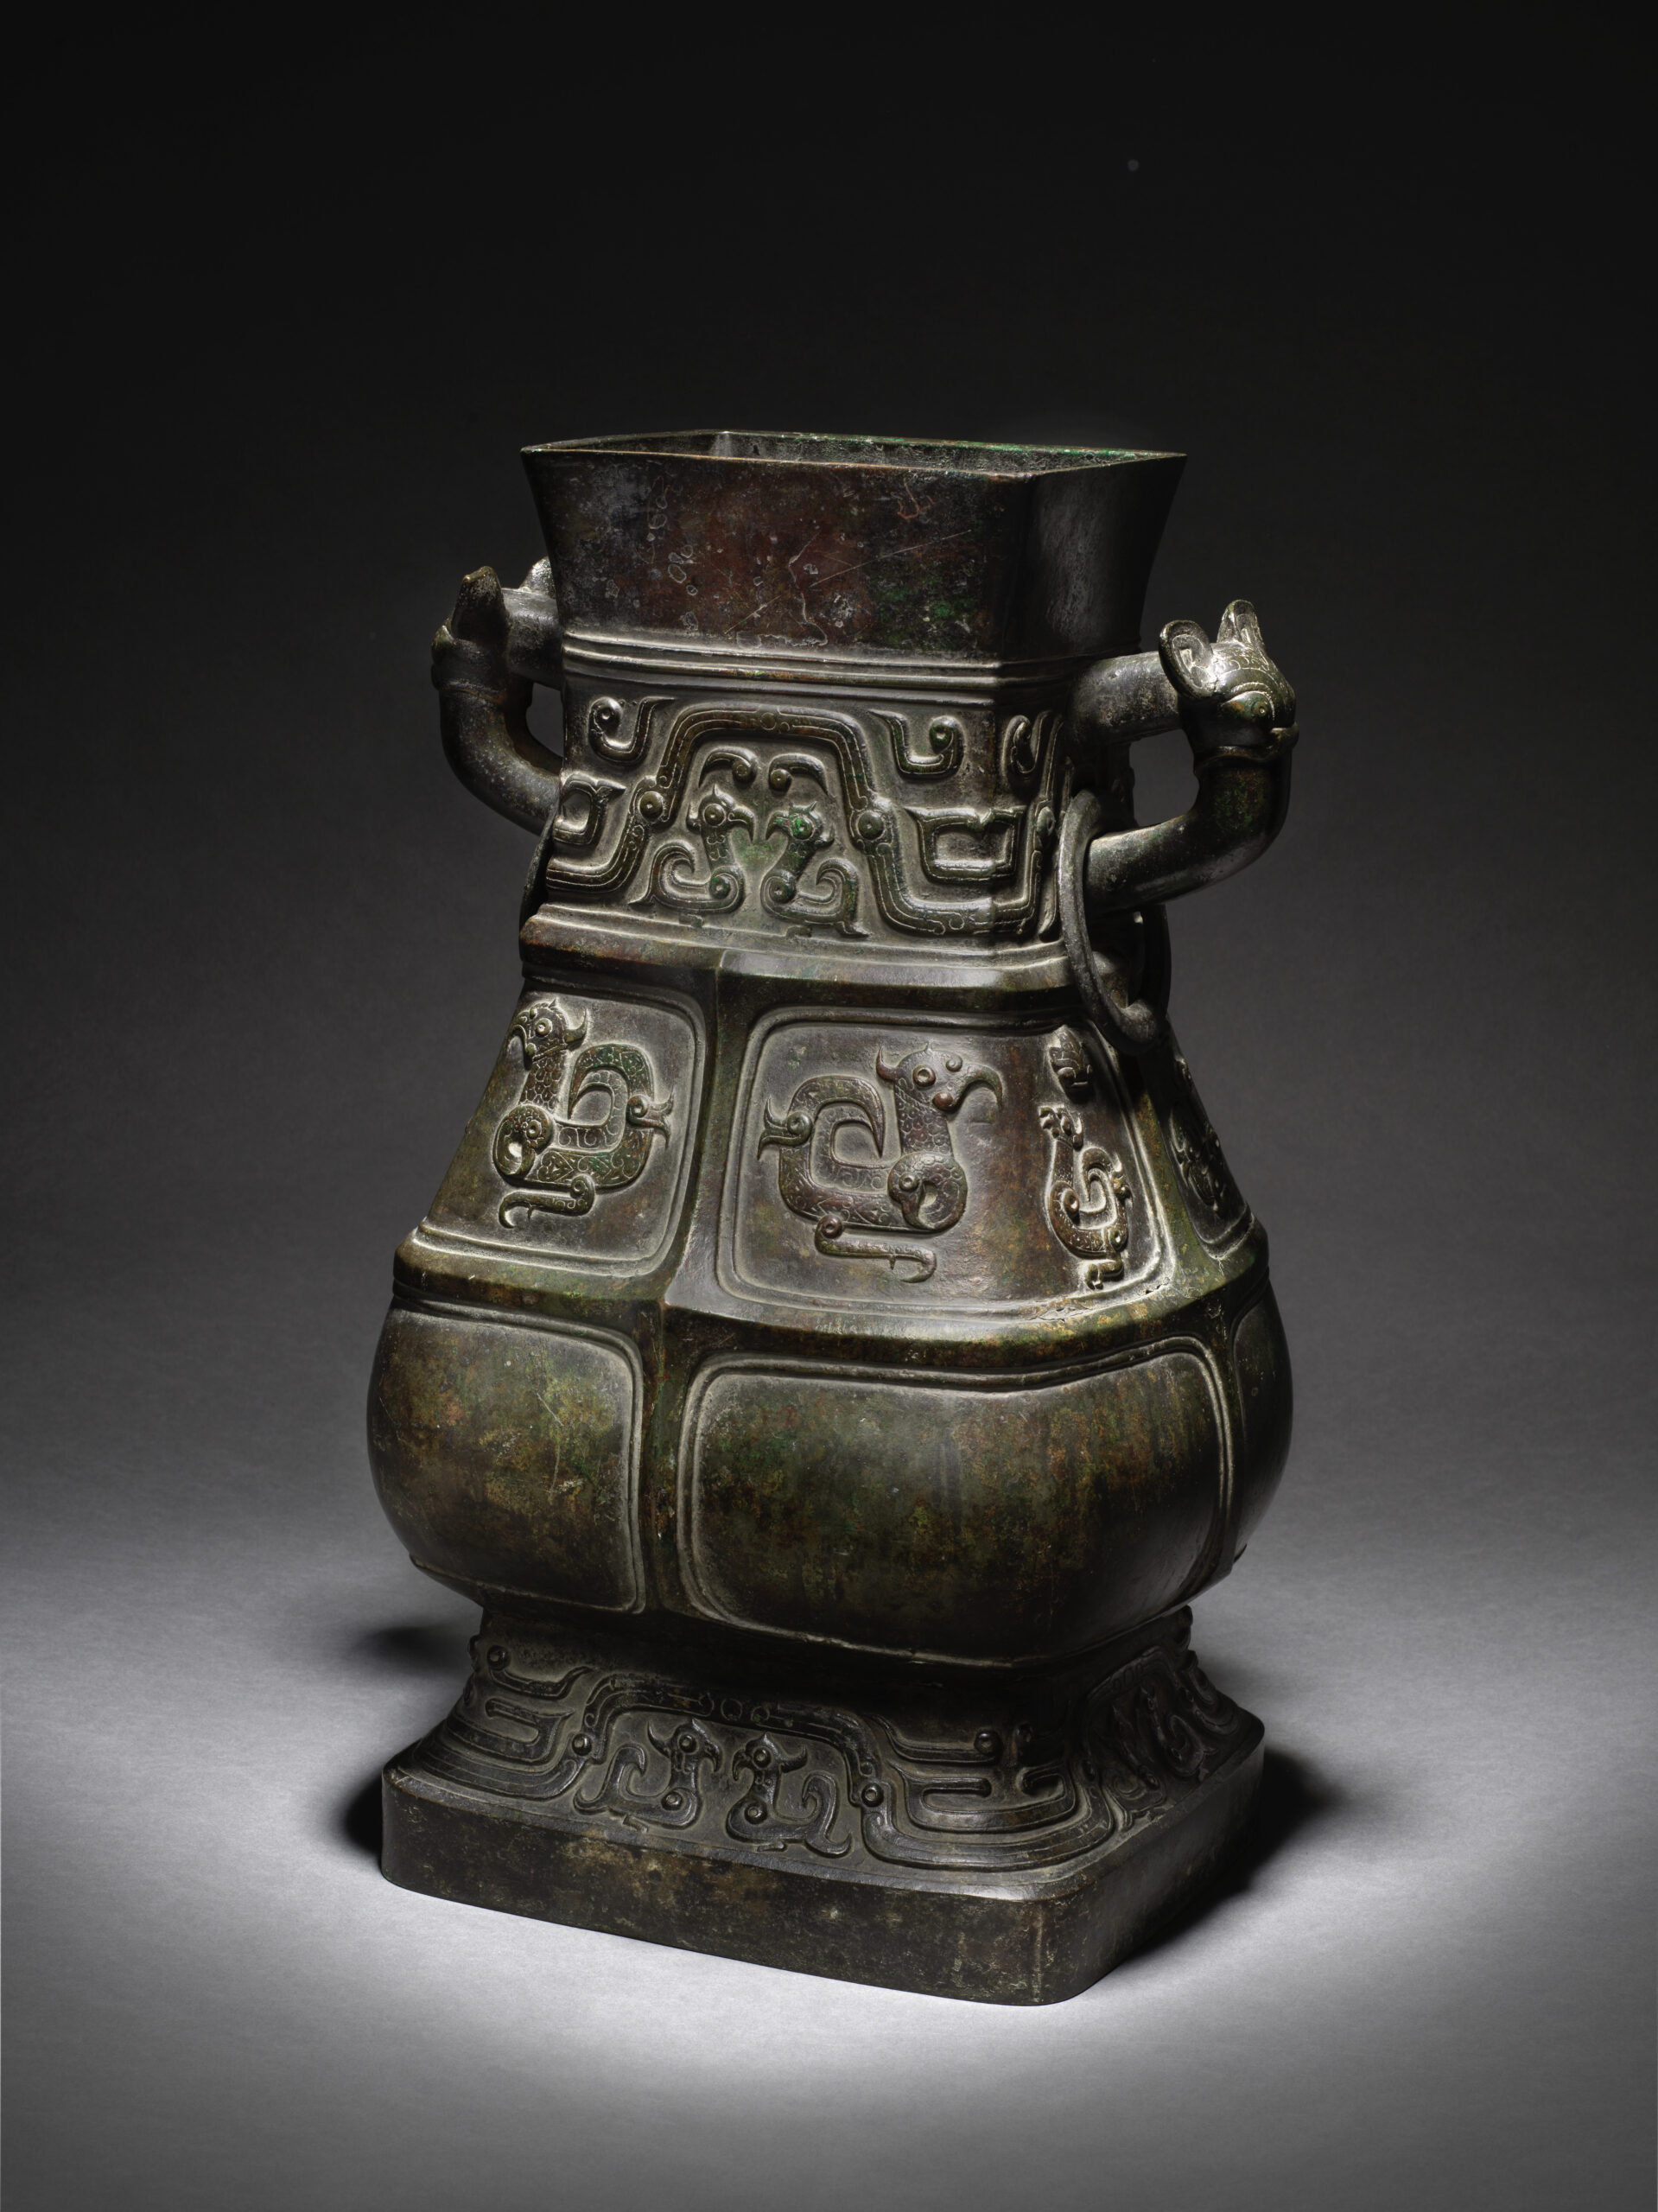 AN IMPORTANT AND RARE MONUMENTAL ARCHAISTIC BRONZE RITUAL WINE VESSEL, FANG HU SongMing Dynasty